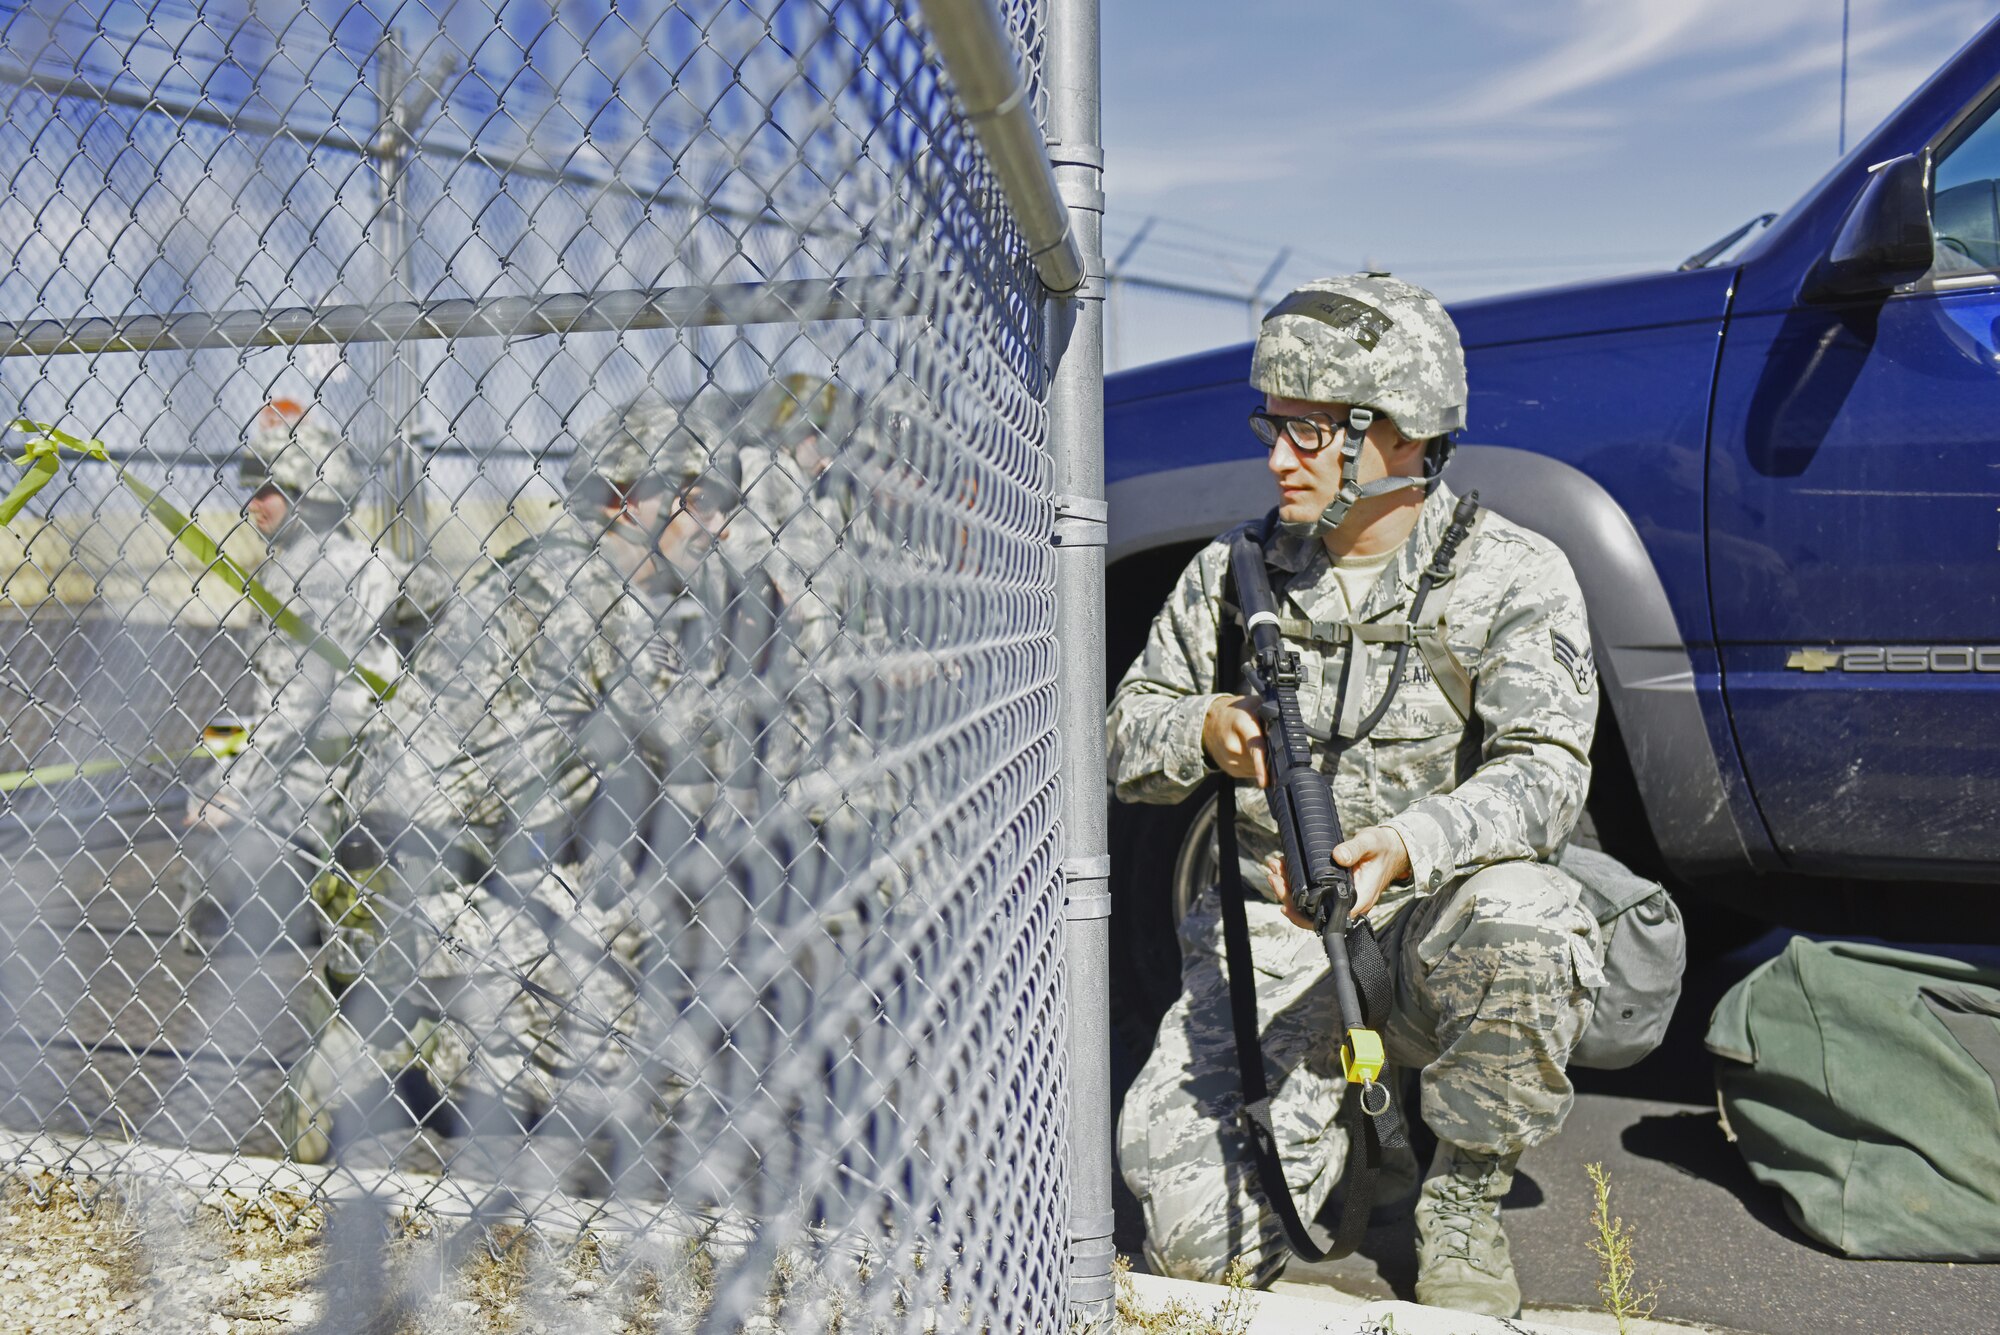 U.S. Air Force Senior Airman Joshua Jorgensen, 140th Civil Engineer Squadron, Colorado Air National Guard, secures the base perimeter during a Wing Wartime Readiness Inspection, Buckley Air Force Base, Colo., Oct. 17, 2015. The WWRI is part of the new Air Force Inspection System which focuses on evaluating mission readiness instead of inspection readiness, allowing commanders to concentrate on strengthening the force by improving daily mission effectiveness. (U.S. Air National Guard photo by Senior Airman Michelle Y. Alvarez-Rea)